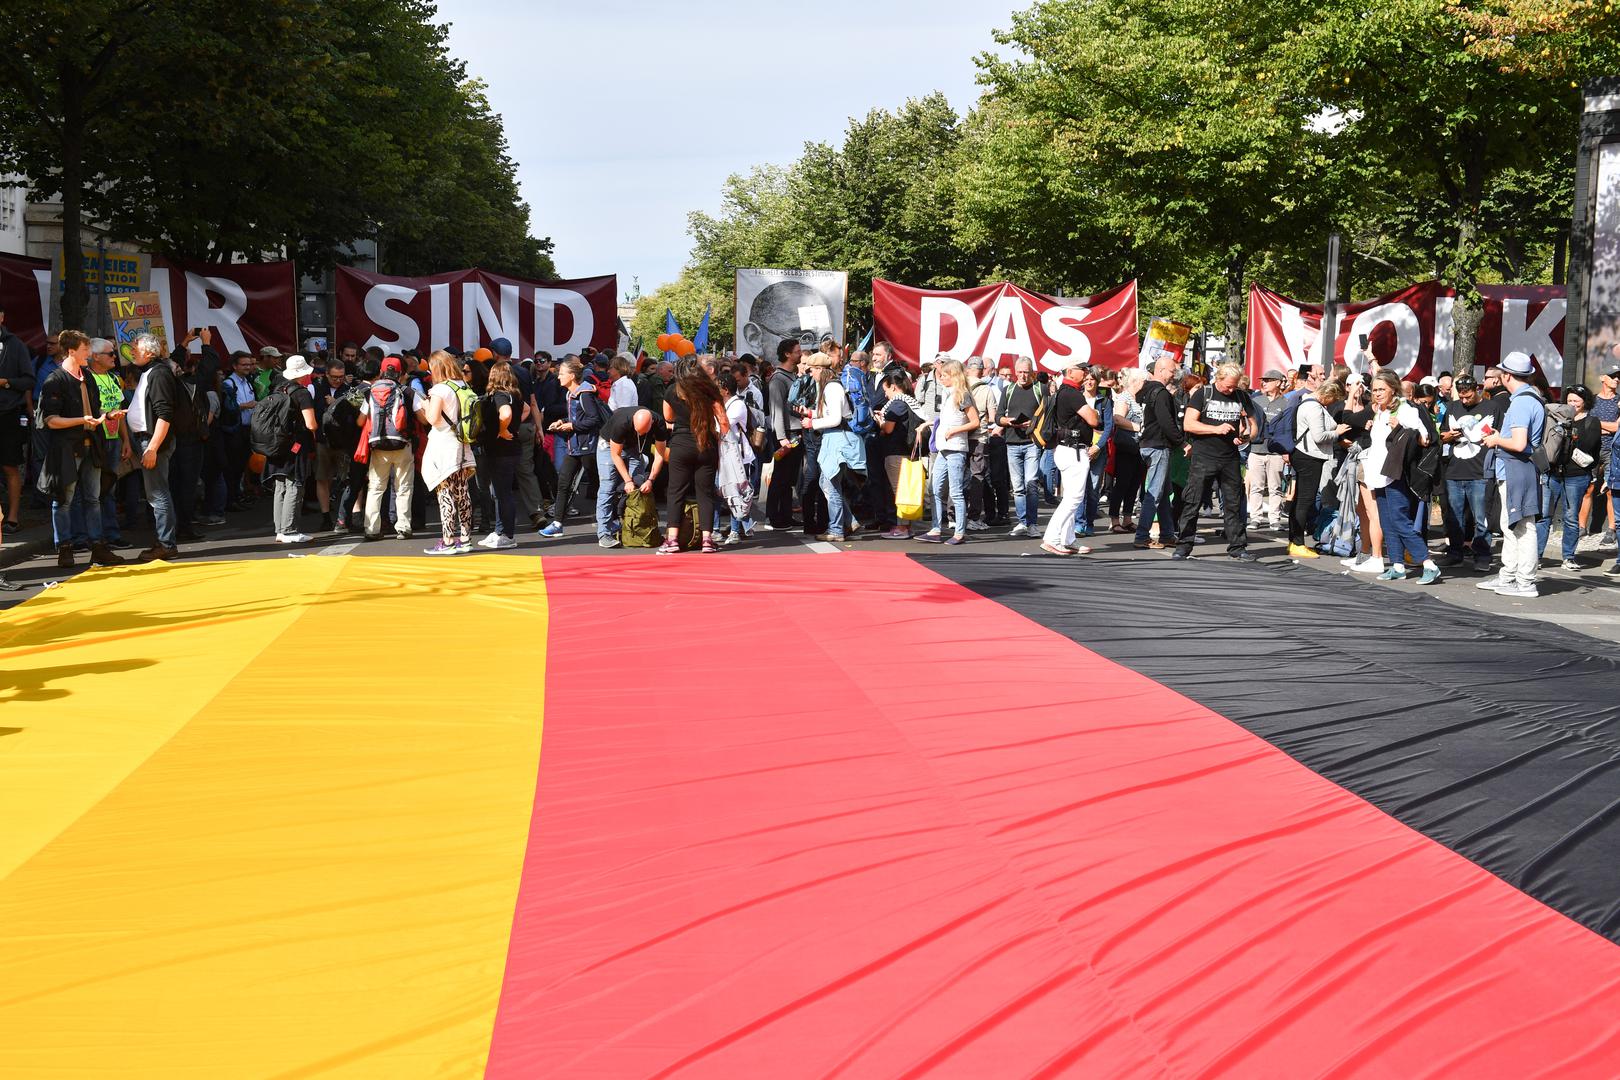 29 August 2020, Berlin: Participants gather behind a large German flag in the street for a demonstration against the Corona measures. Photo: Bernd Von Jutrczenka/dpa /DPA/PIXSELL